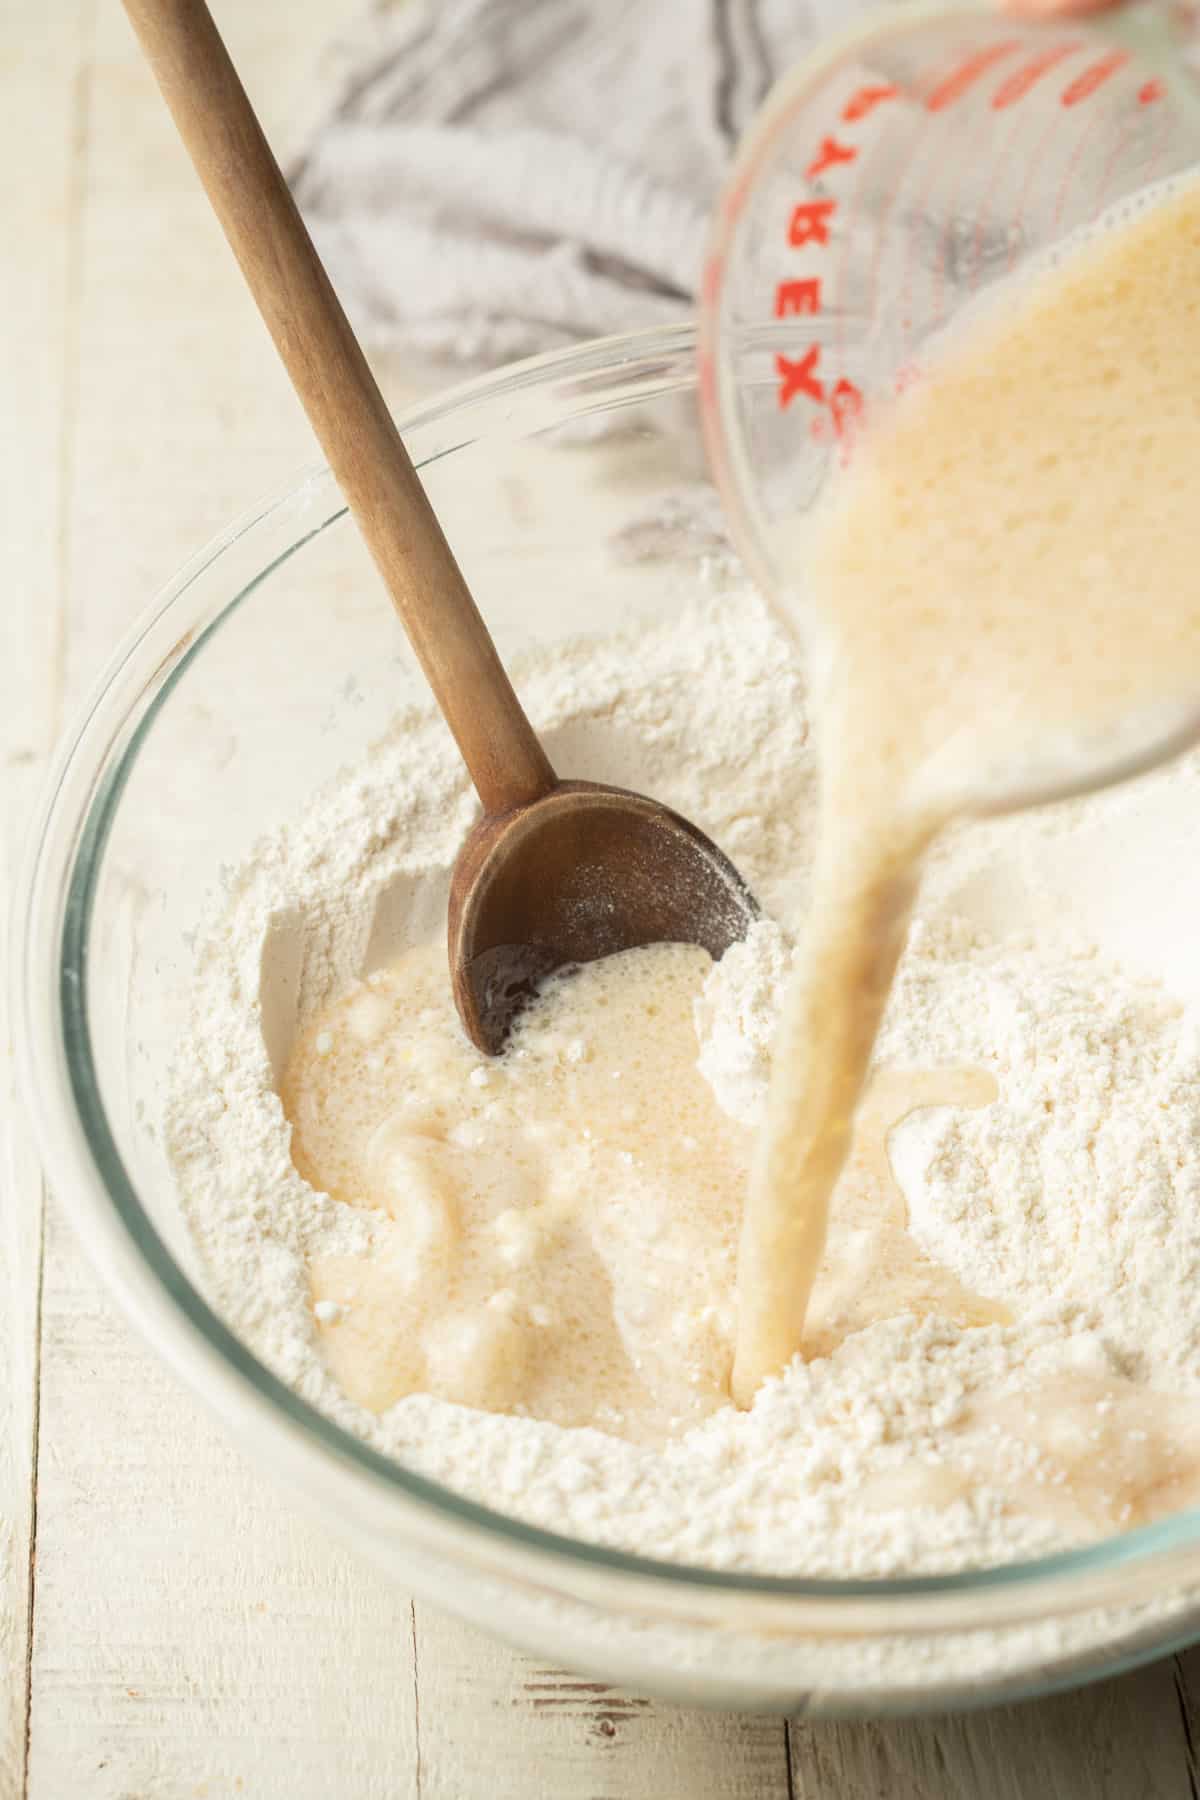 Liquid ingredients being poured into a bowl of dry ingredients for making muffin batter.